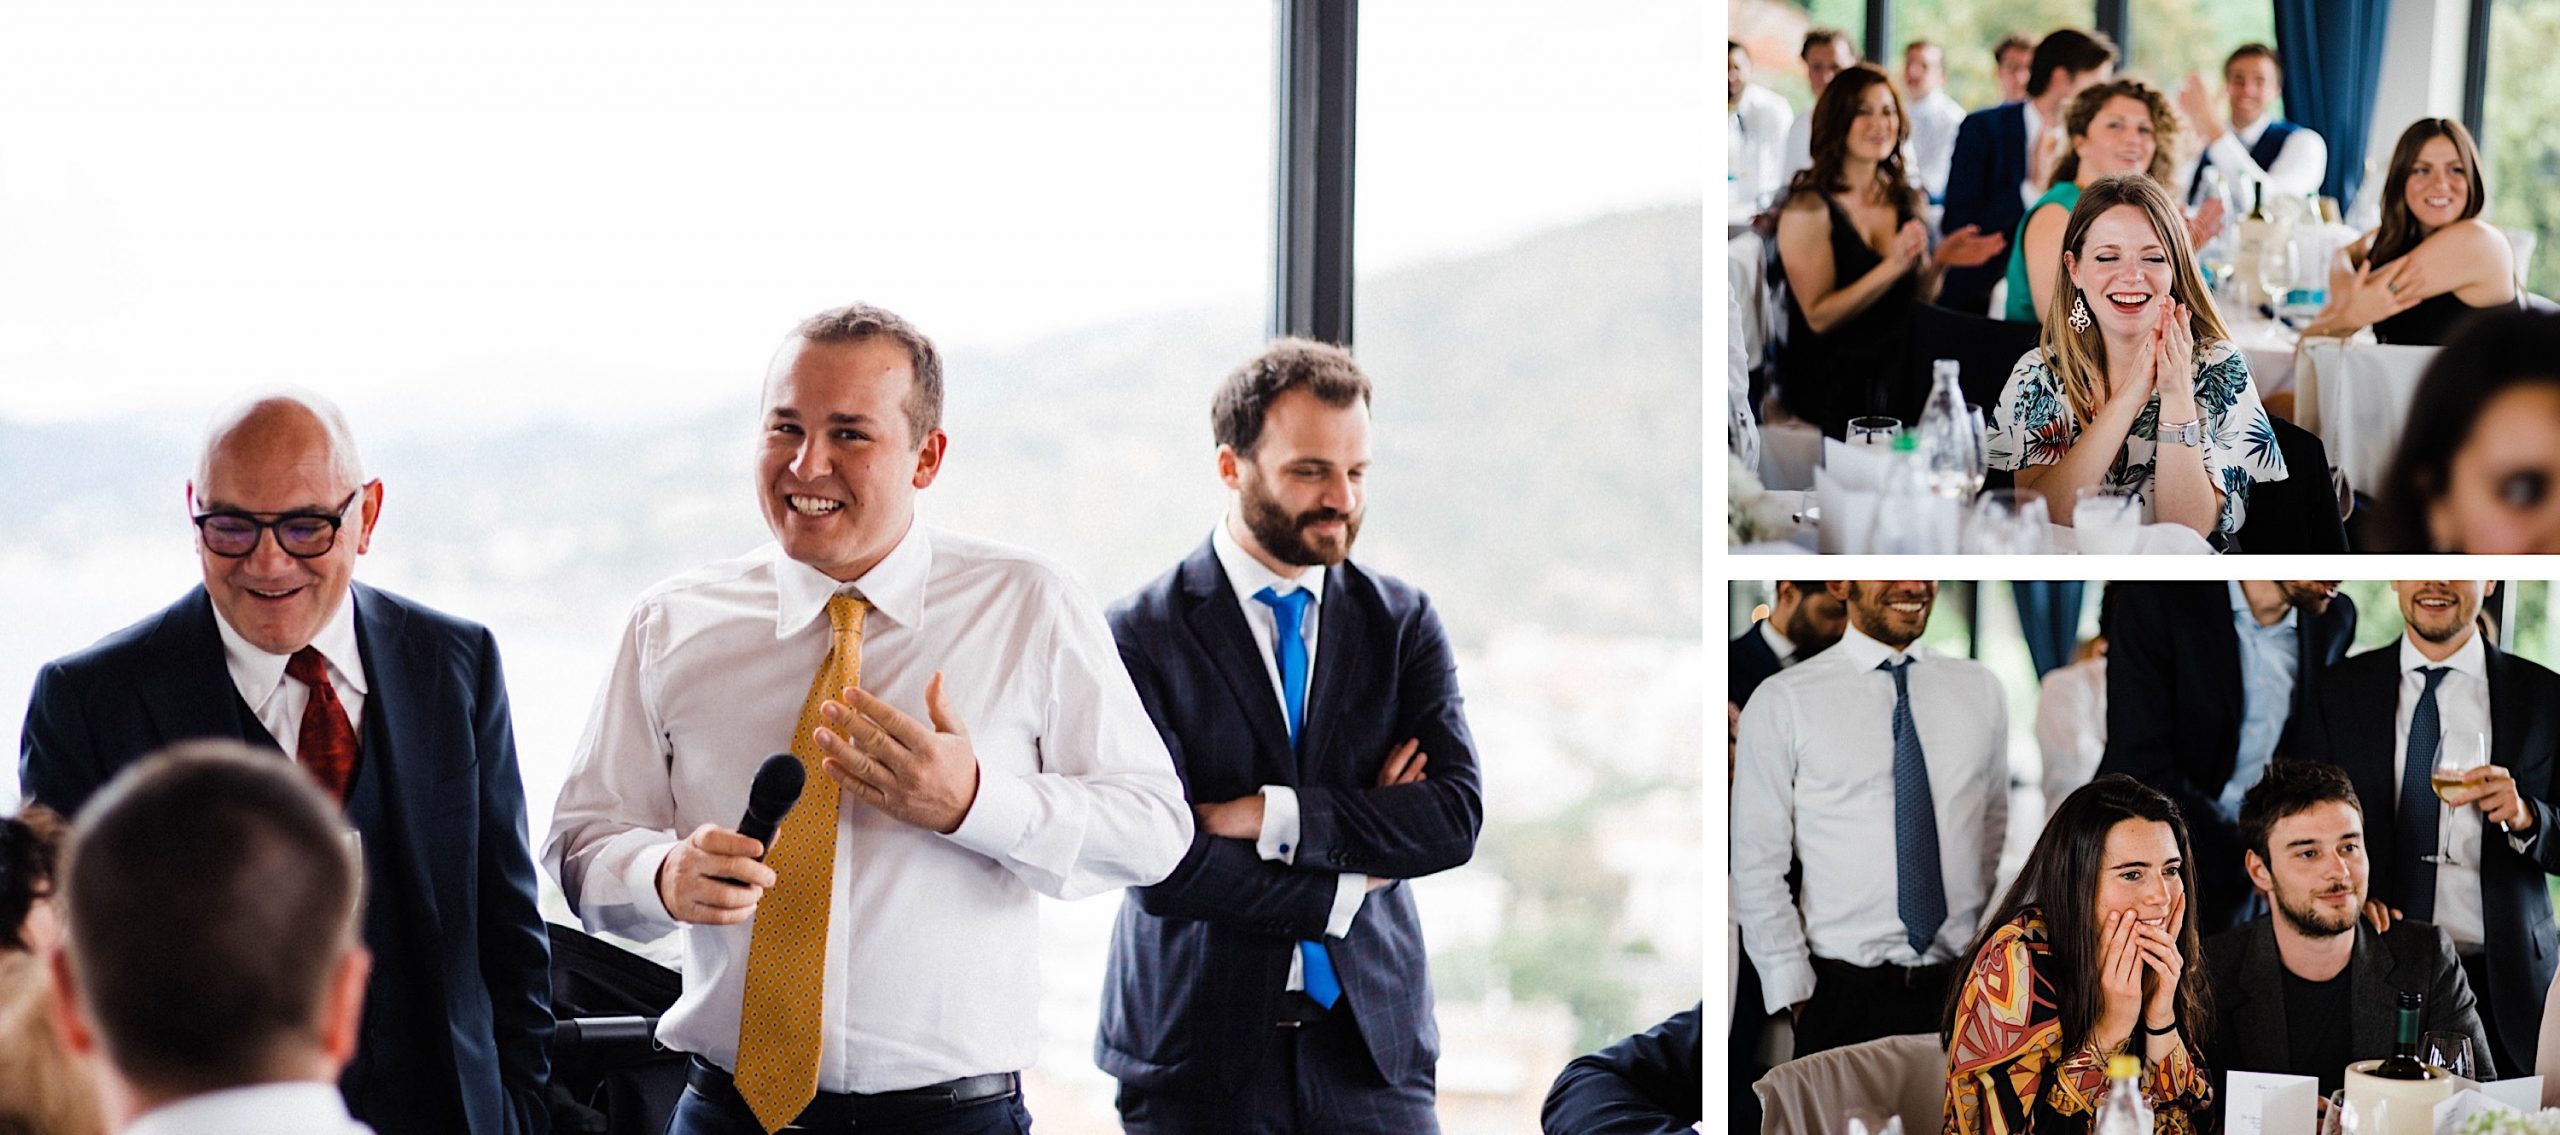 Candid Wedding Photography of guests reactions to the Best Man's Speech during a Sestri Levante Wedding and of the Best Man.